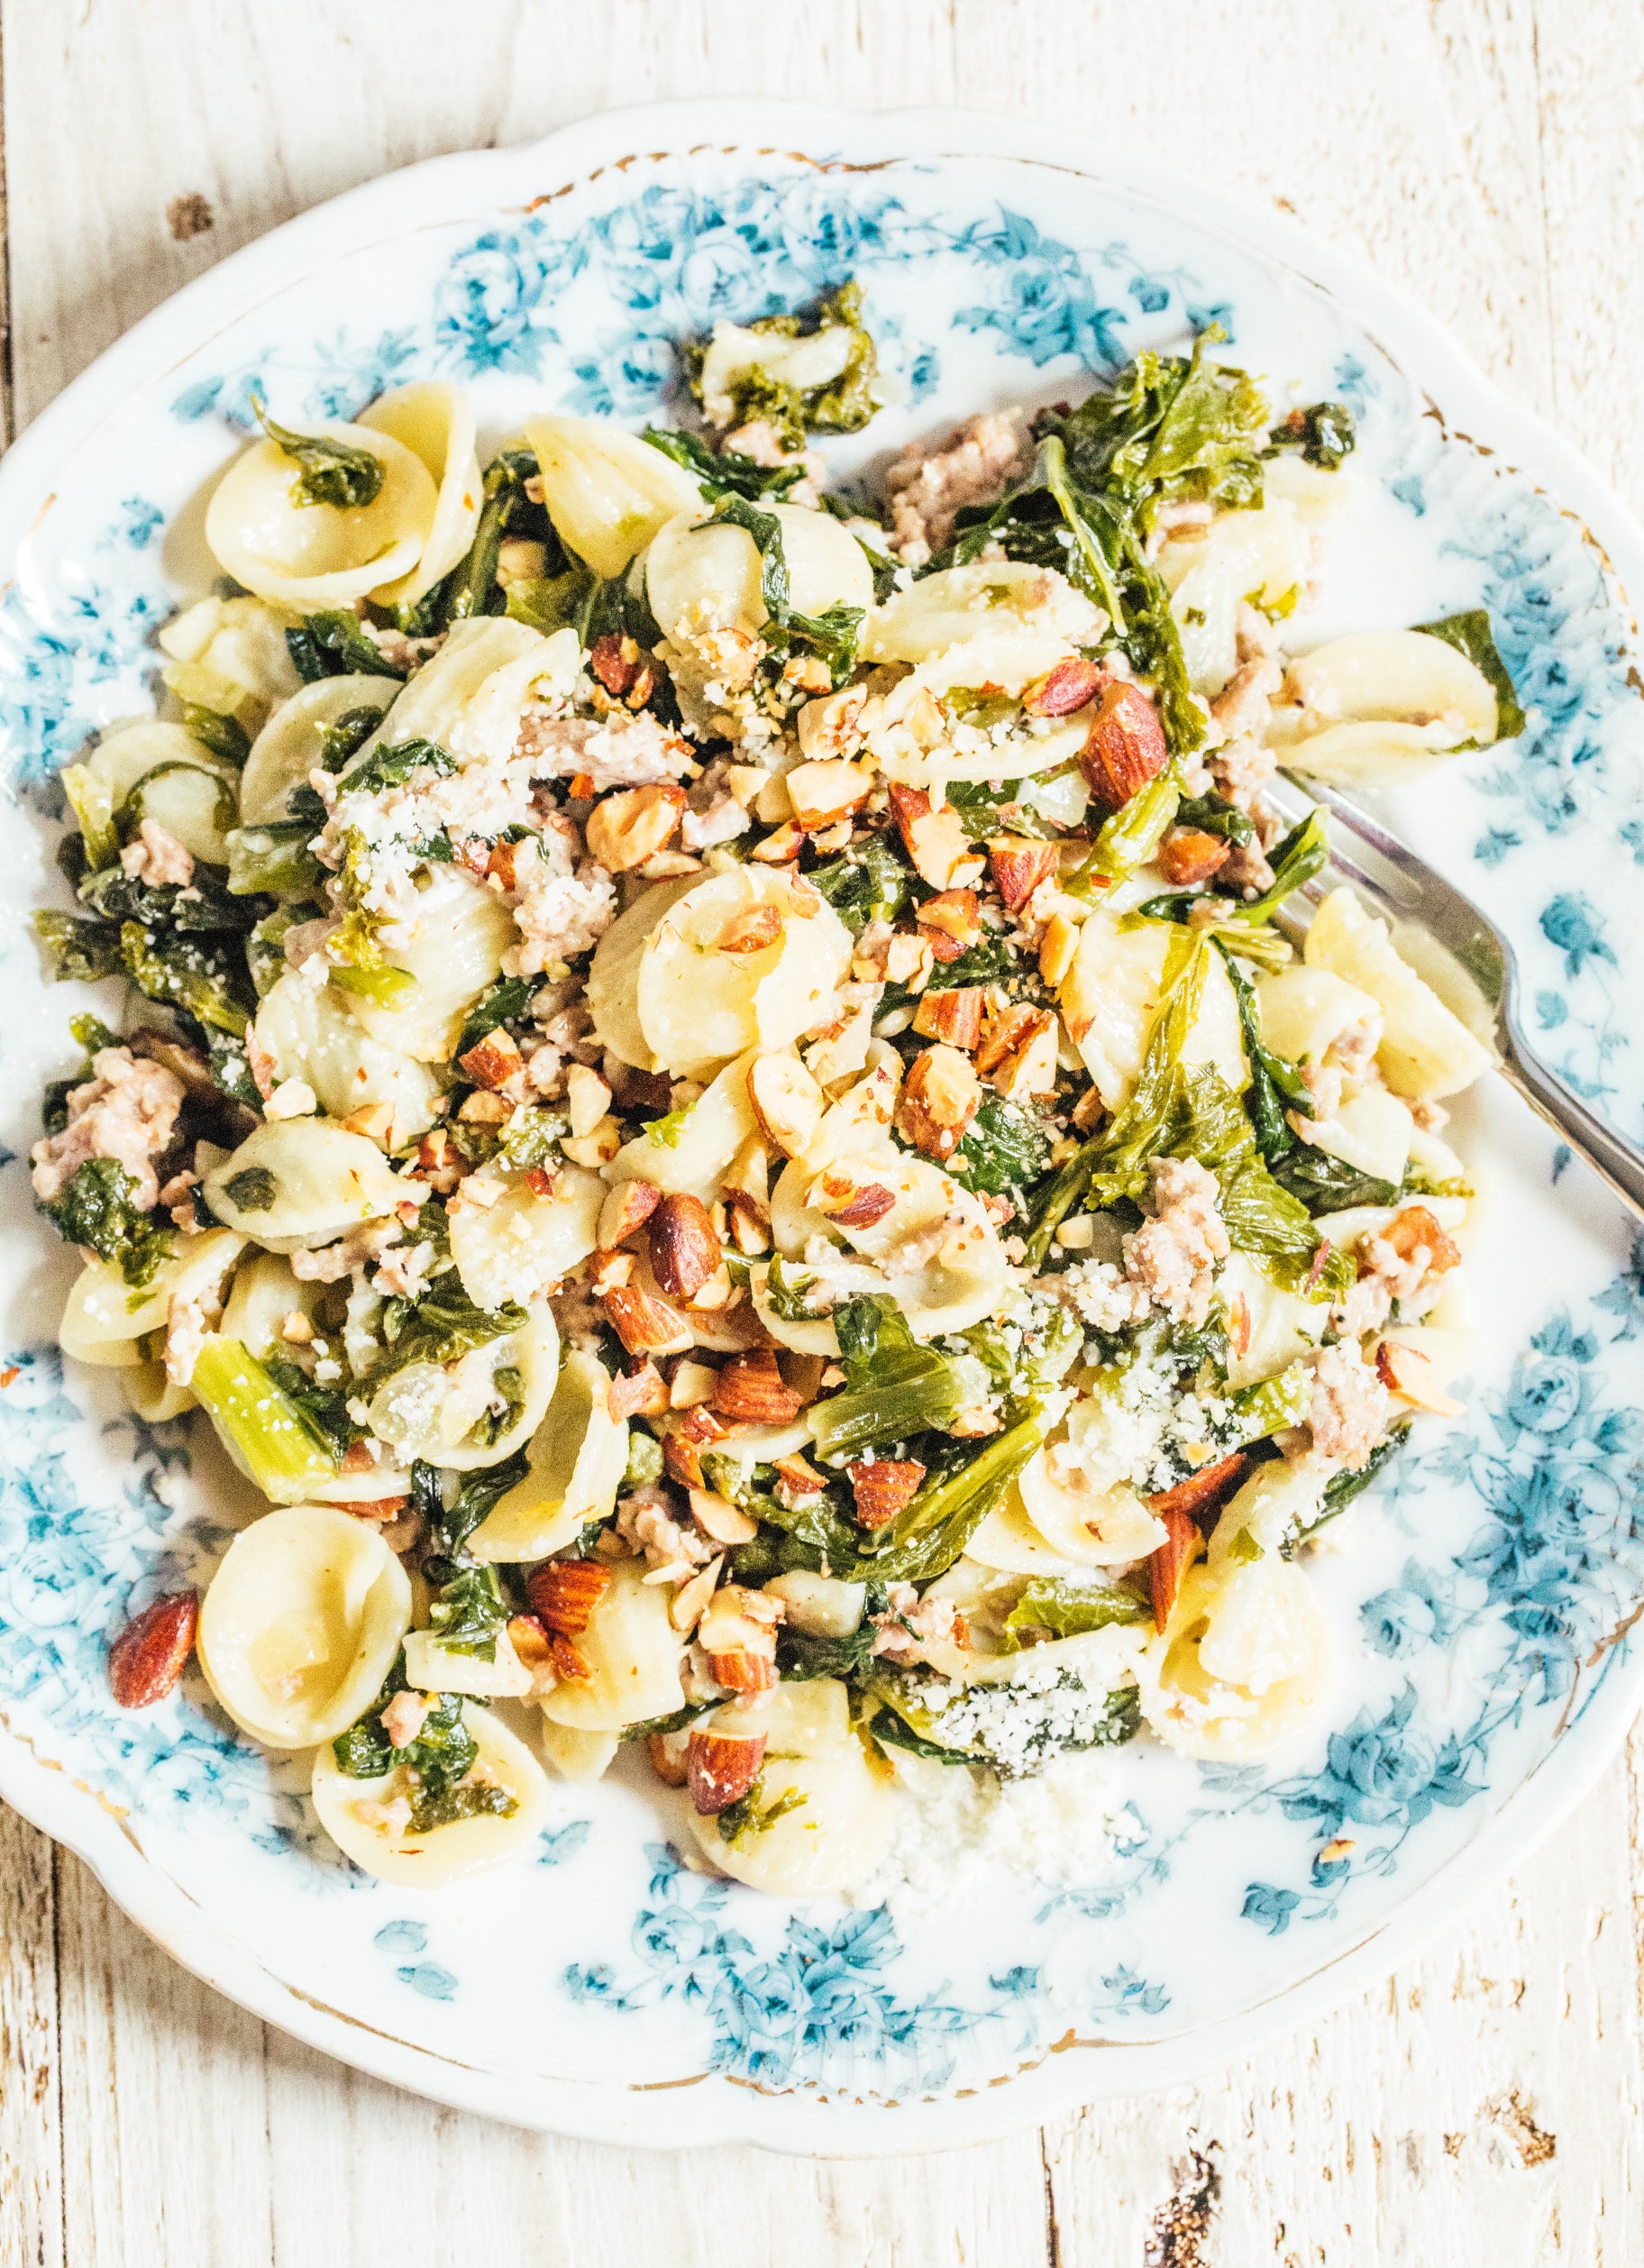 Pasta with Mustard Greens and Crispy Sausage